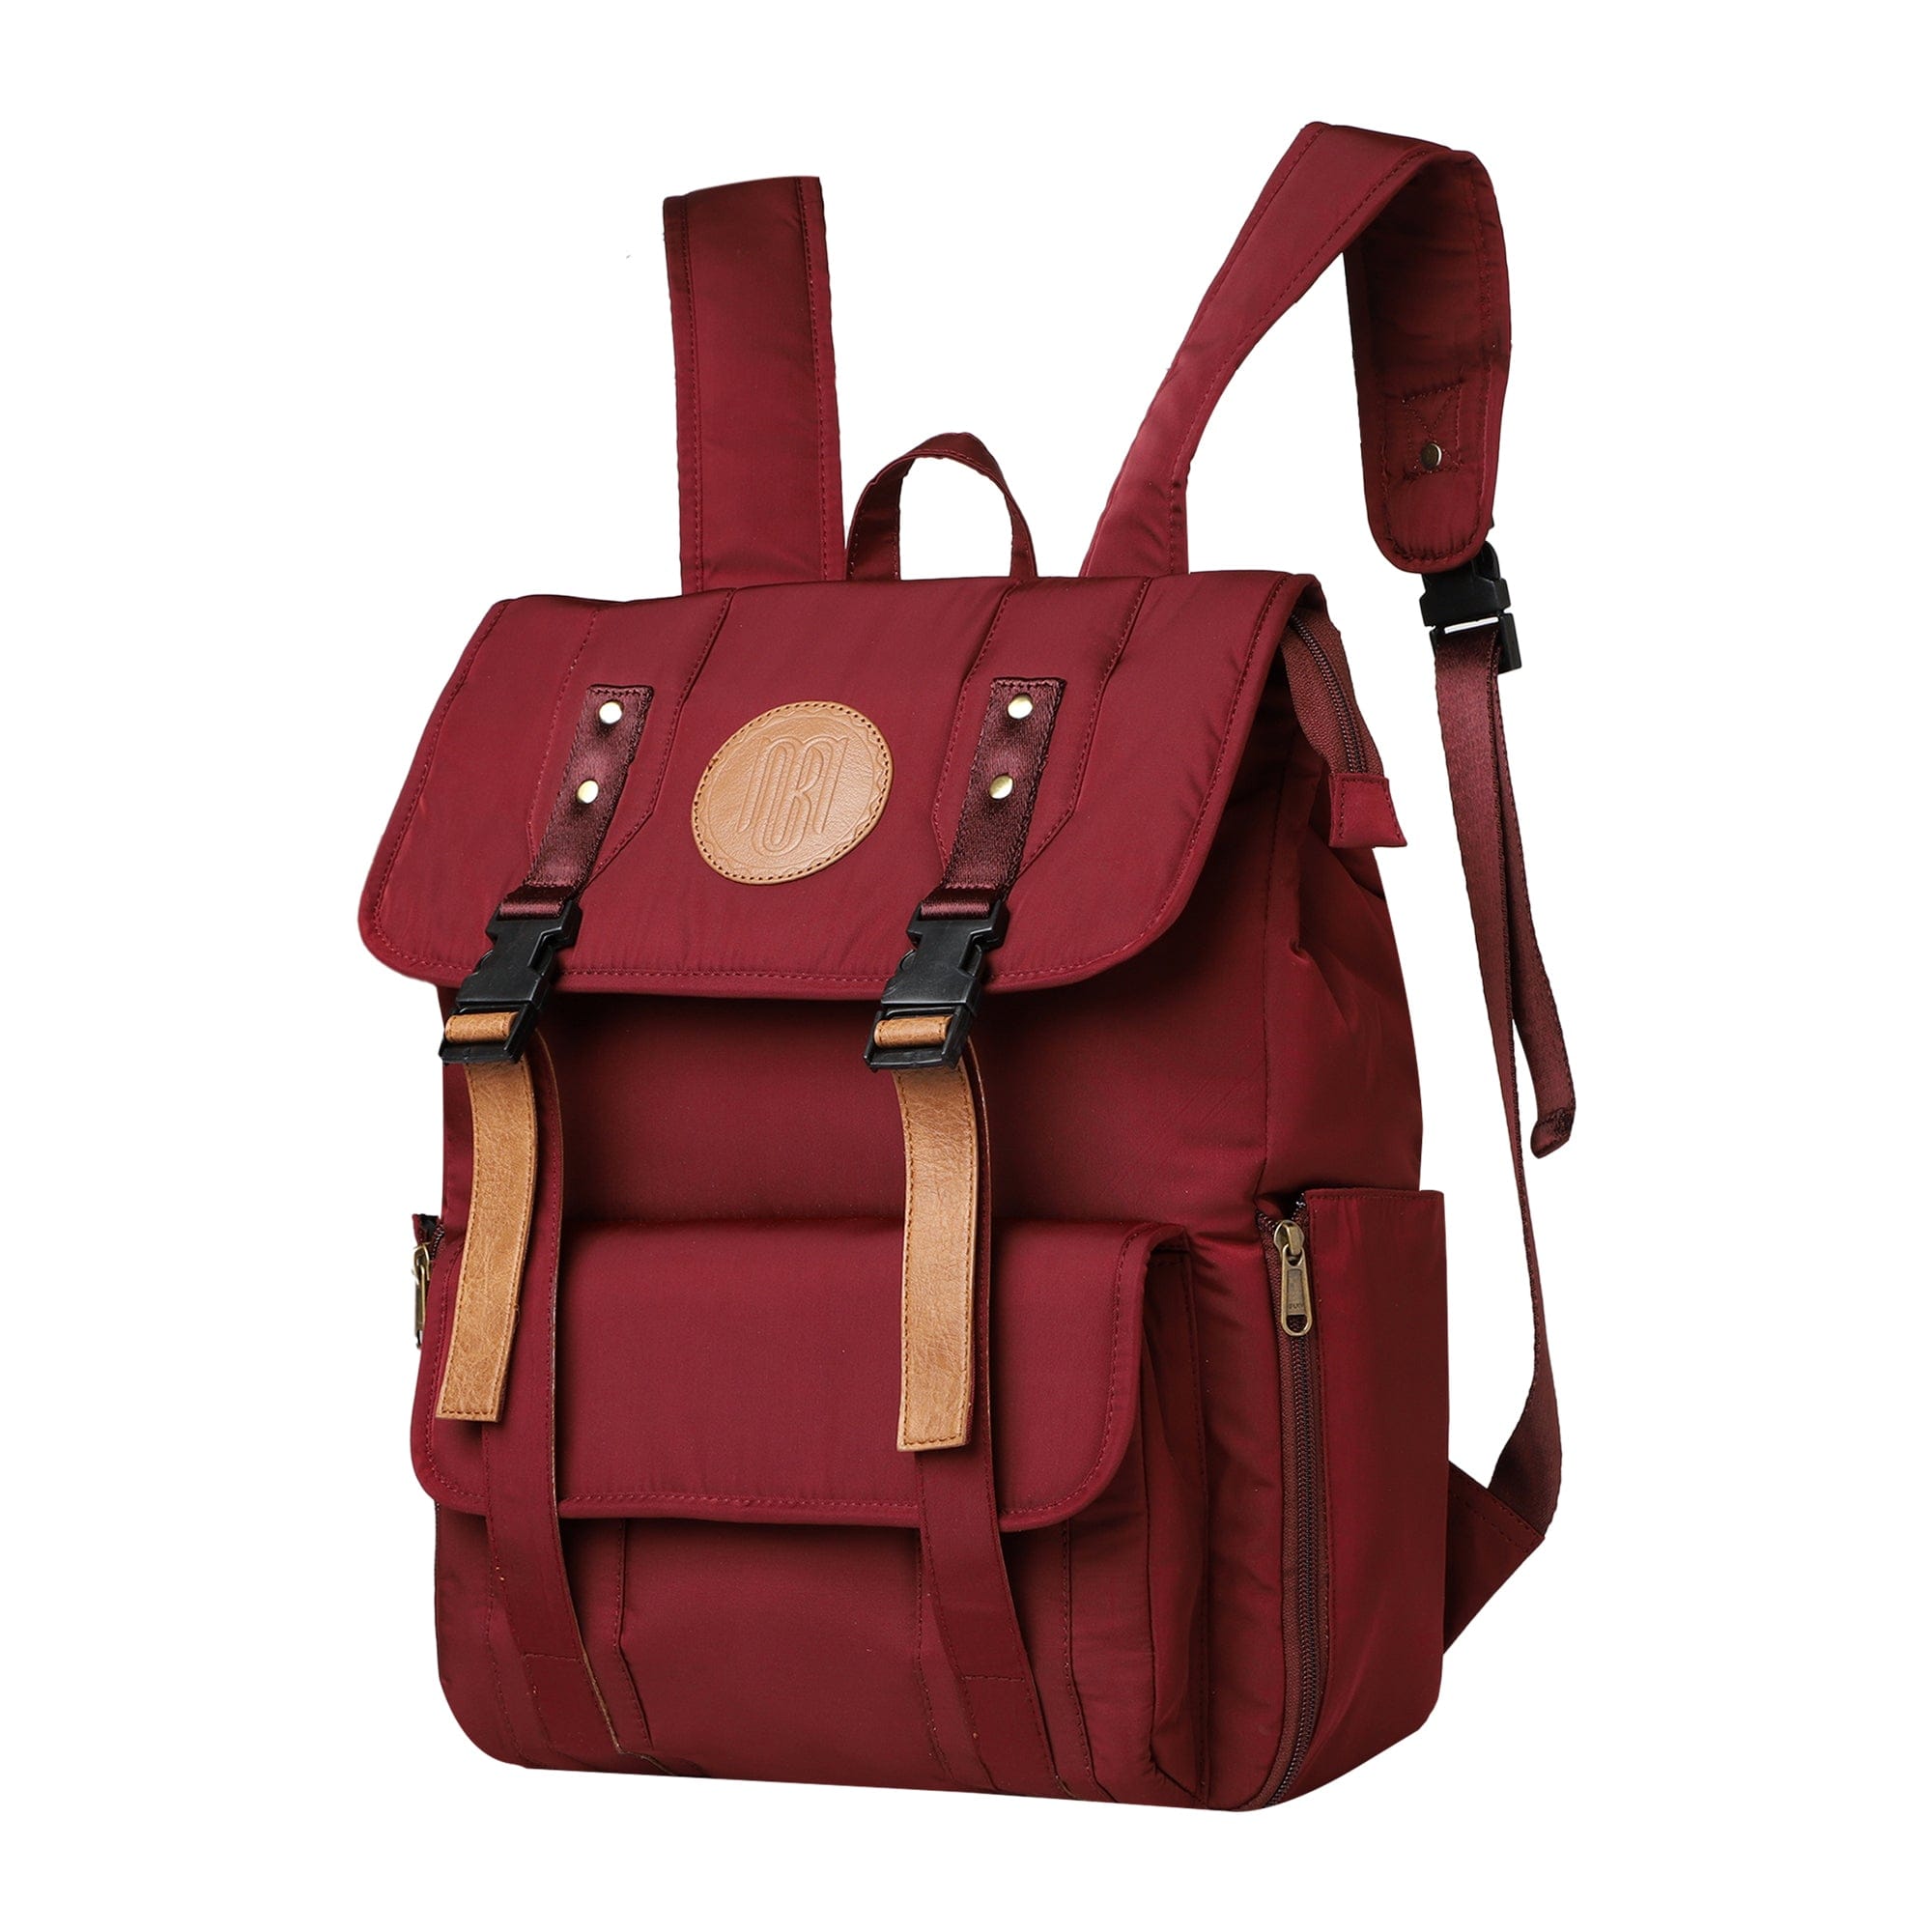 Mona B Unisex Backpack With 14 inches Laptop Compartment: Troy Wine - RP-303 WIN - Backpack by Mona-B - Backpack, Flash Sale, INT_Backpack, New Arrivals, Sale